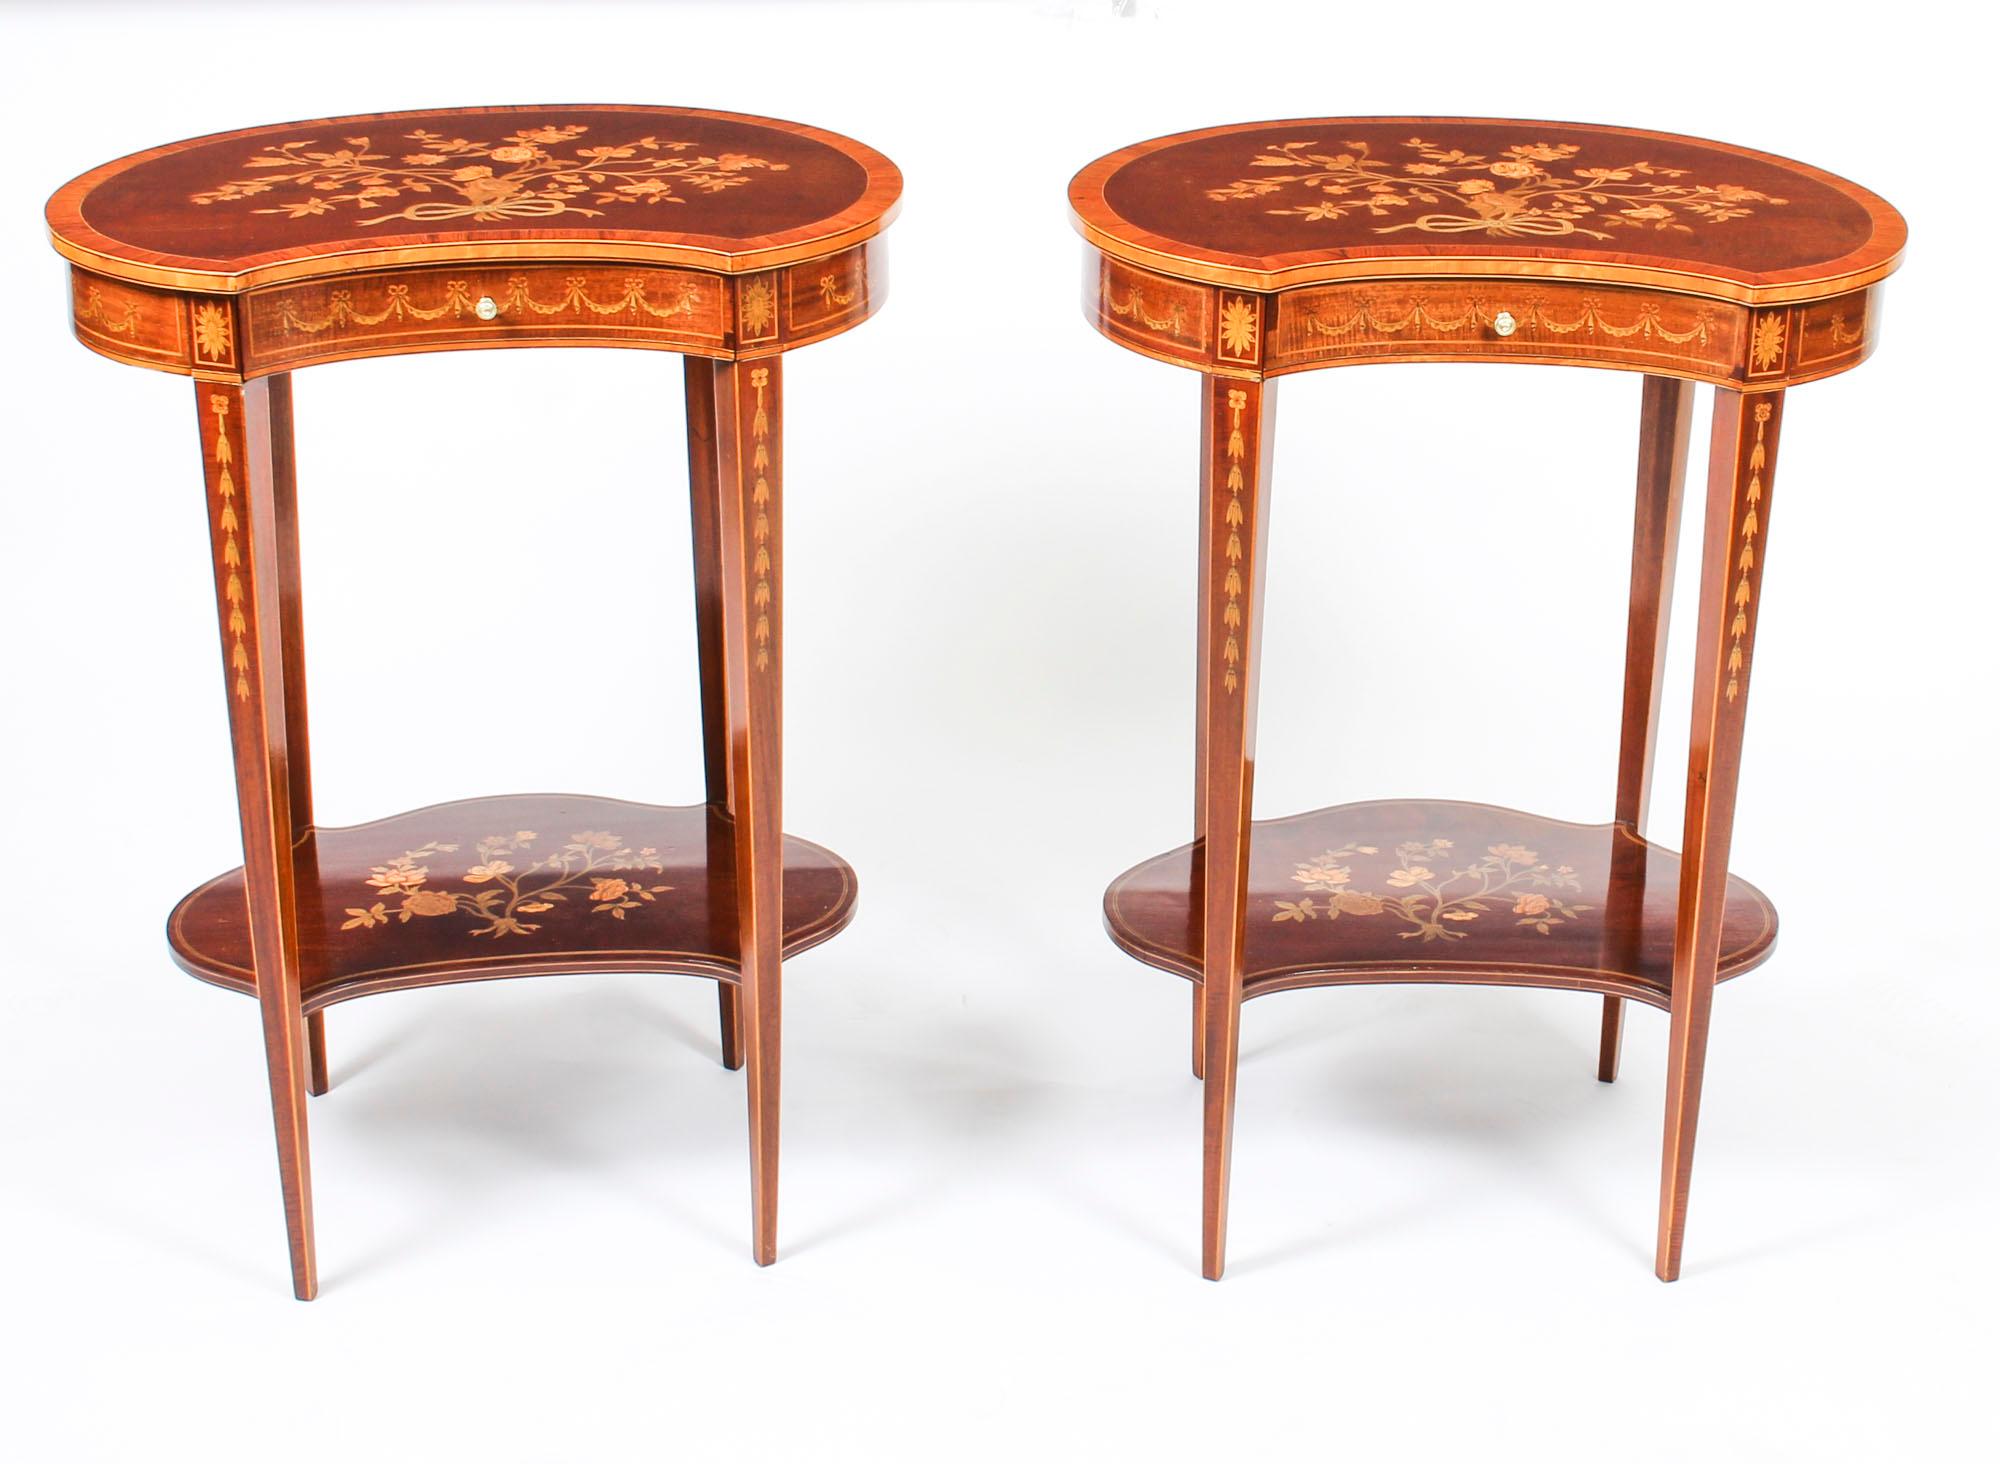 This is a gorgeous pair of antique English kidney shaped mahogany marquetry inlaid occasional tables, circa 1880 in date.

The tables each have crossbanded tops beautifully inlaid with ribbons tied flowers, the friezes with inlaid swags and with